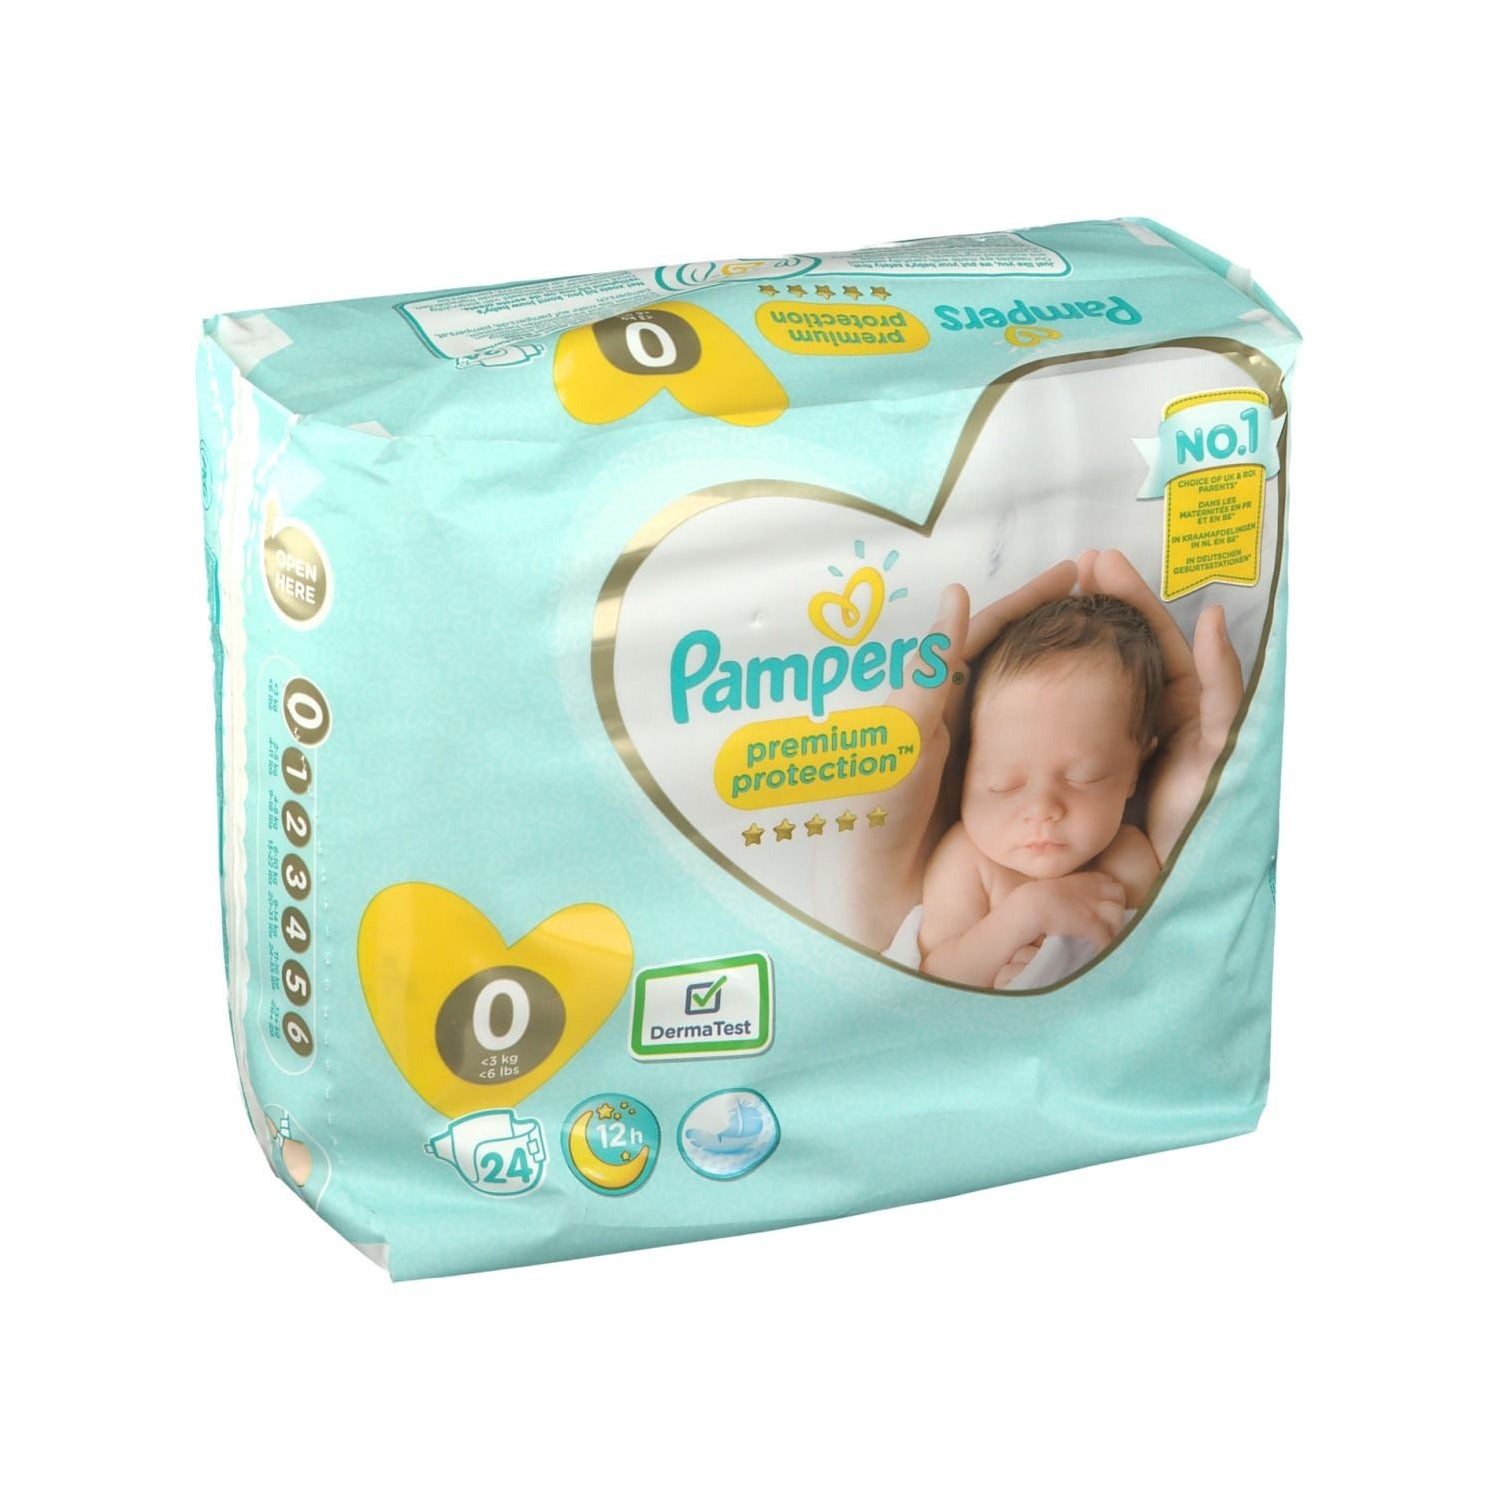 Couch Pampers Prem Prot T0 -3Kg 24